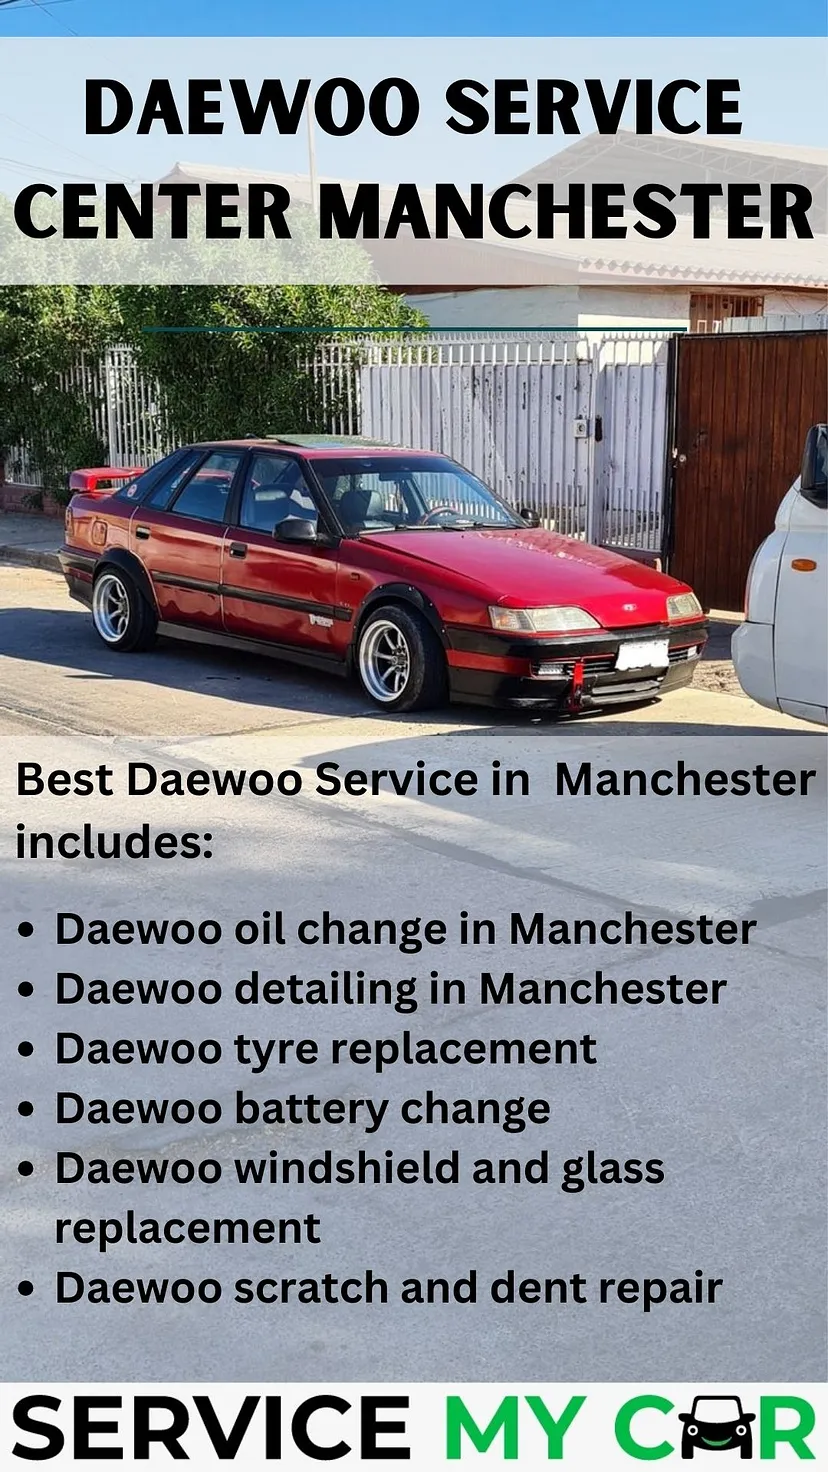 Daewoo Car Common Problems and How to Solve Them 1*7tgP4heP4NchWDN5XWzgwQ